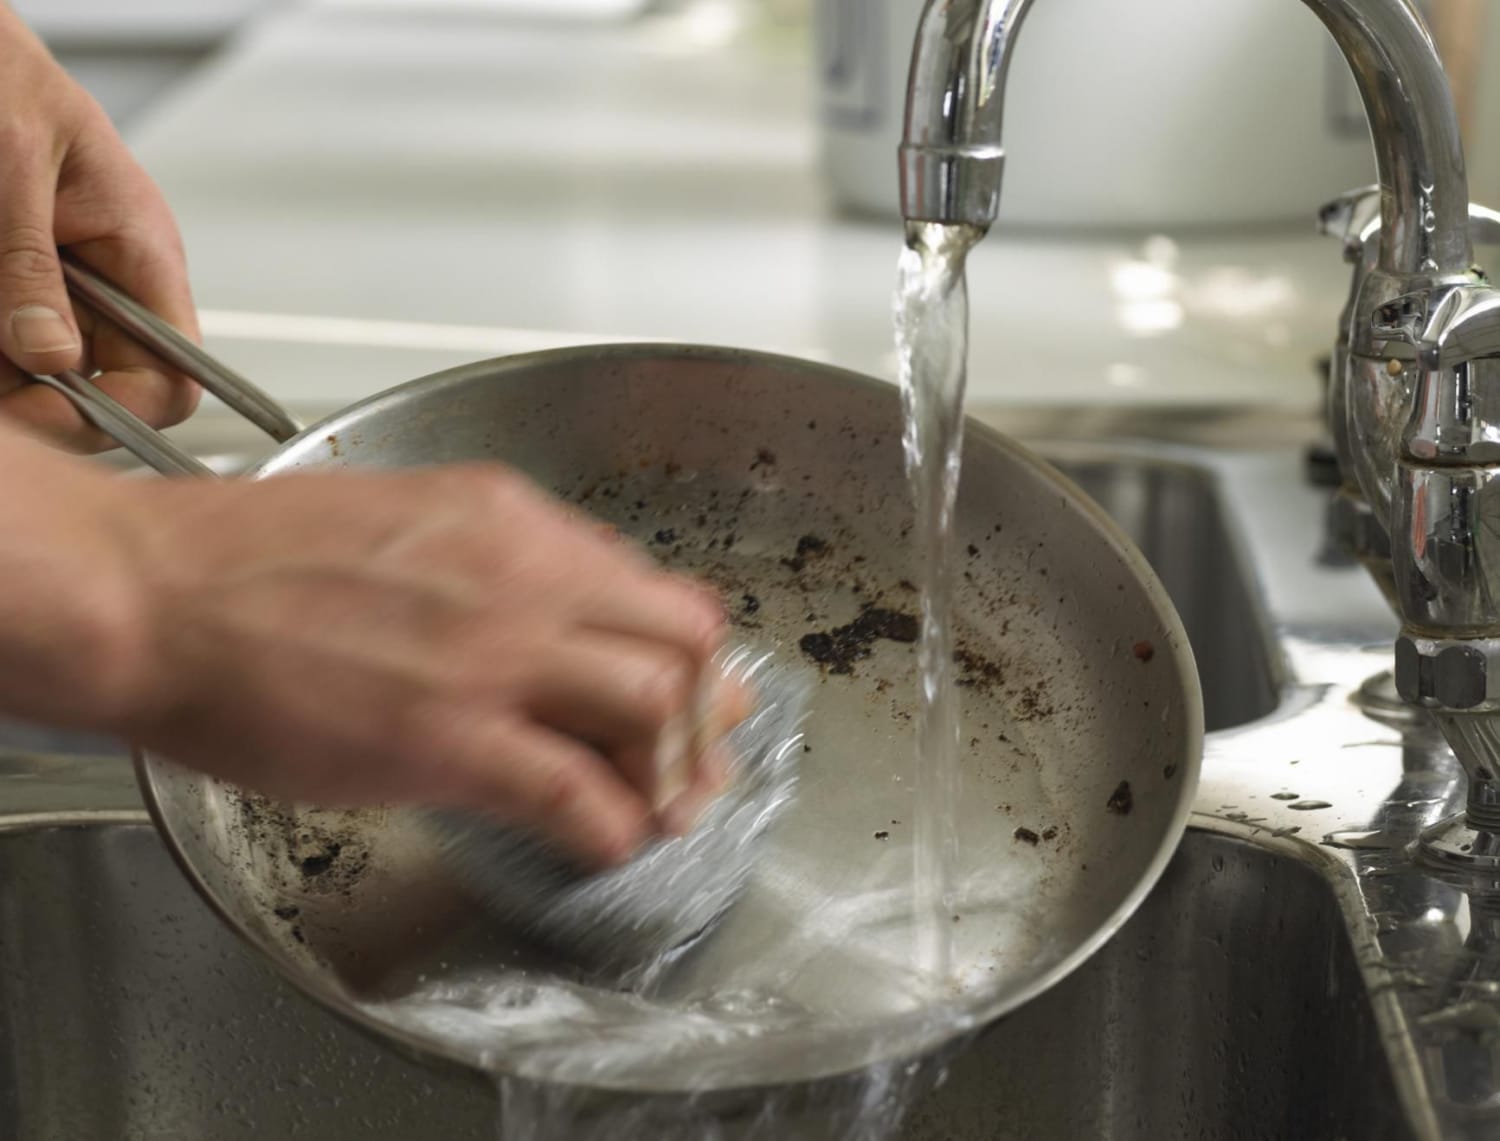 How to Use Baking Soda to Shine Pots, Pans, and Cookie Sheets